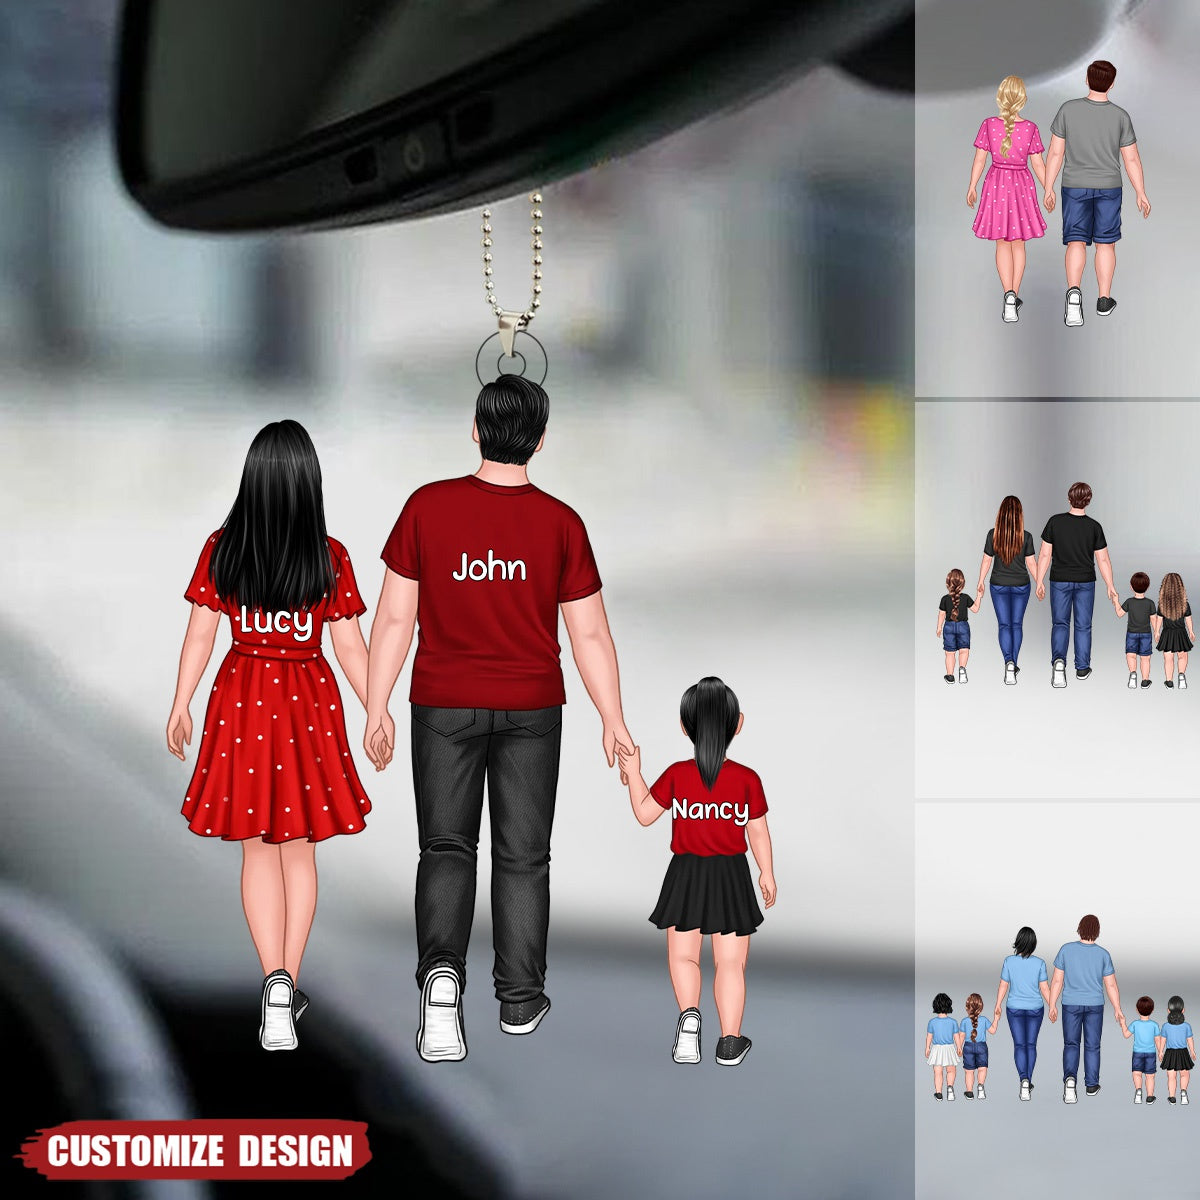 Personalized Family Acrylic Car Ornament - GIft For Couple, Family